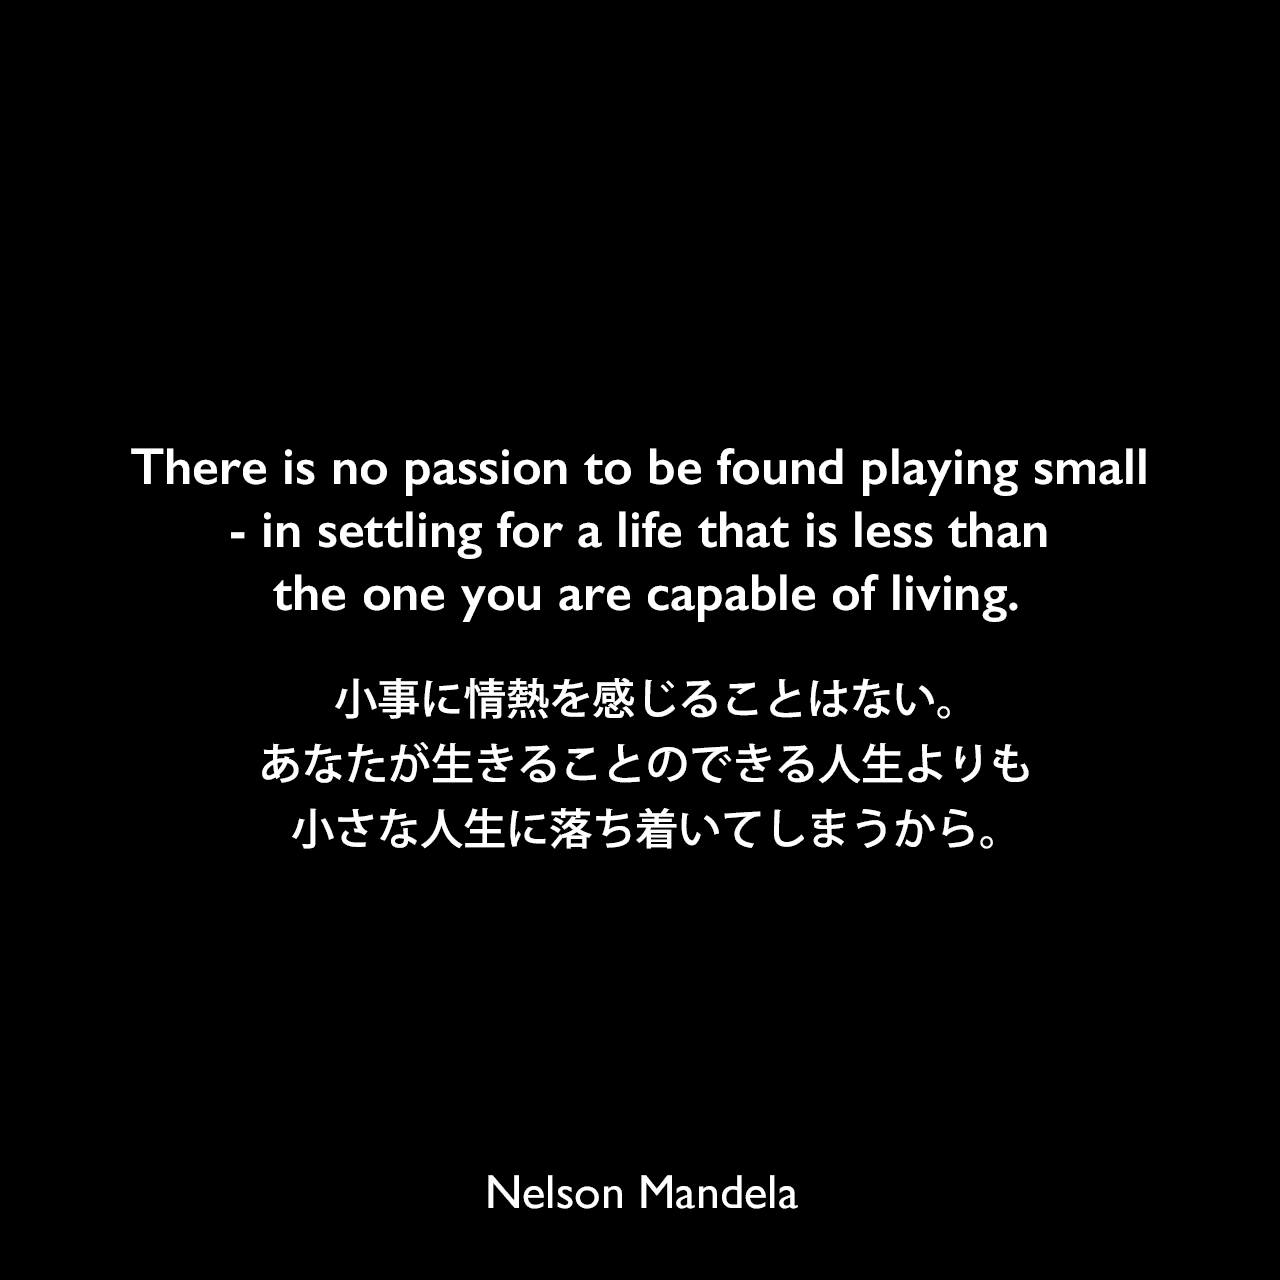 There is no passion to be found playing small - in settling for a life that is less than the one you are capable of living.小事に情熱を感じることはない。あなたが生きることのできる人生よりも小さな人生に落ち着いてしまうから。Nelson Mandela